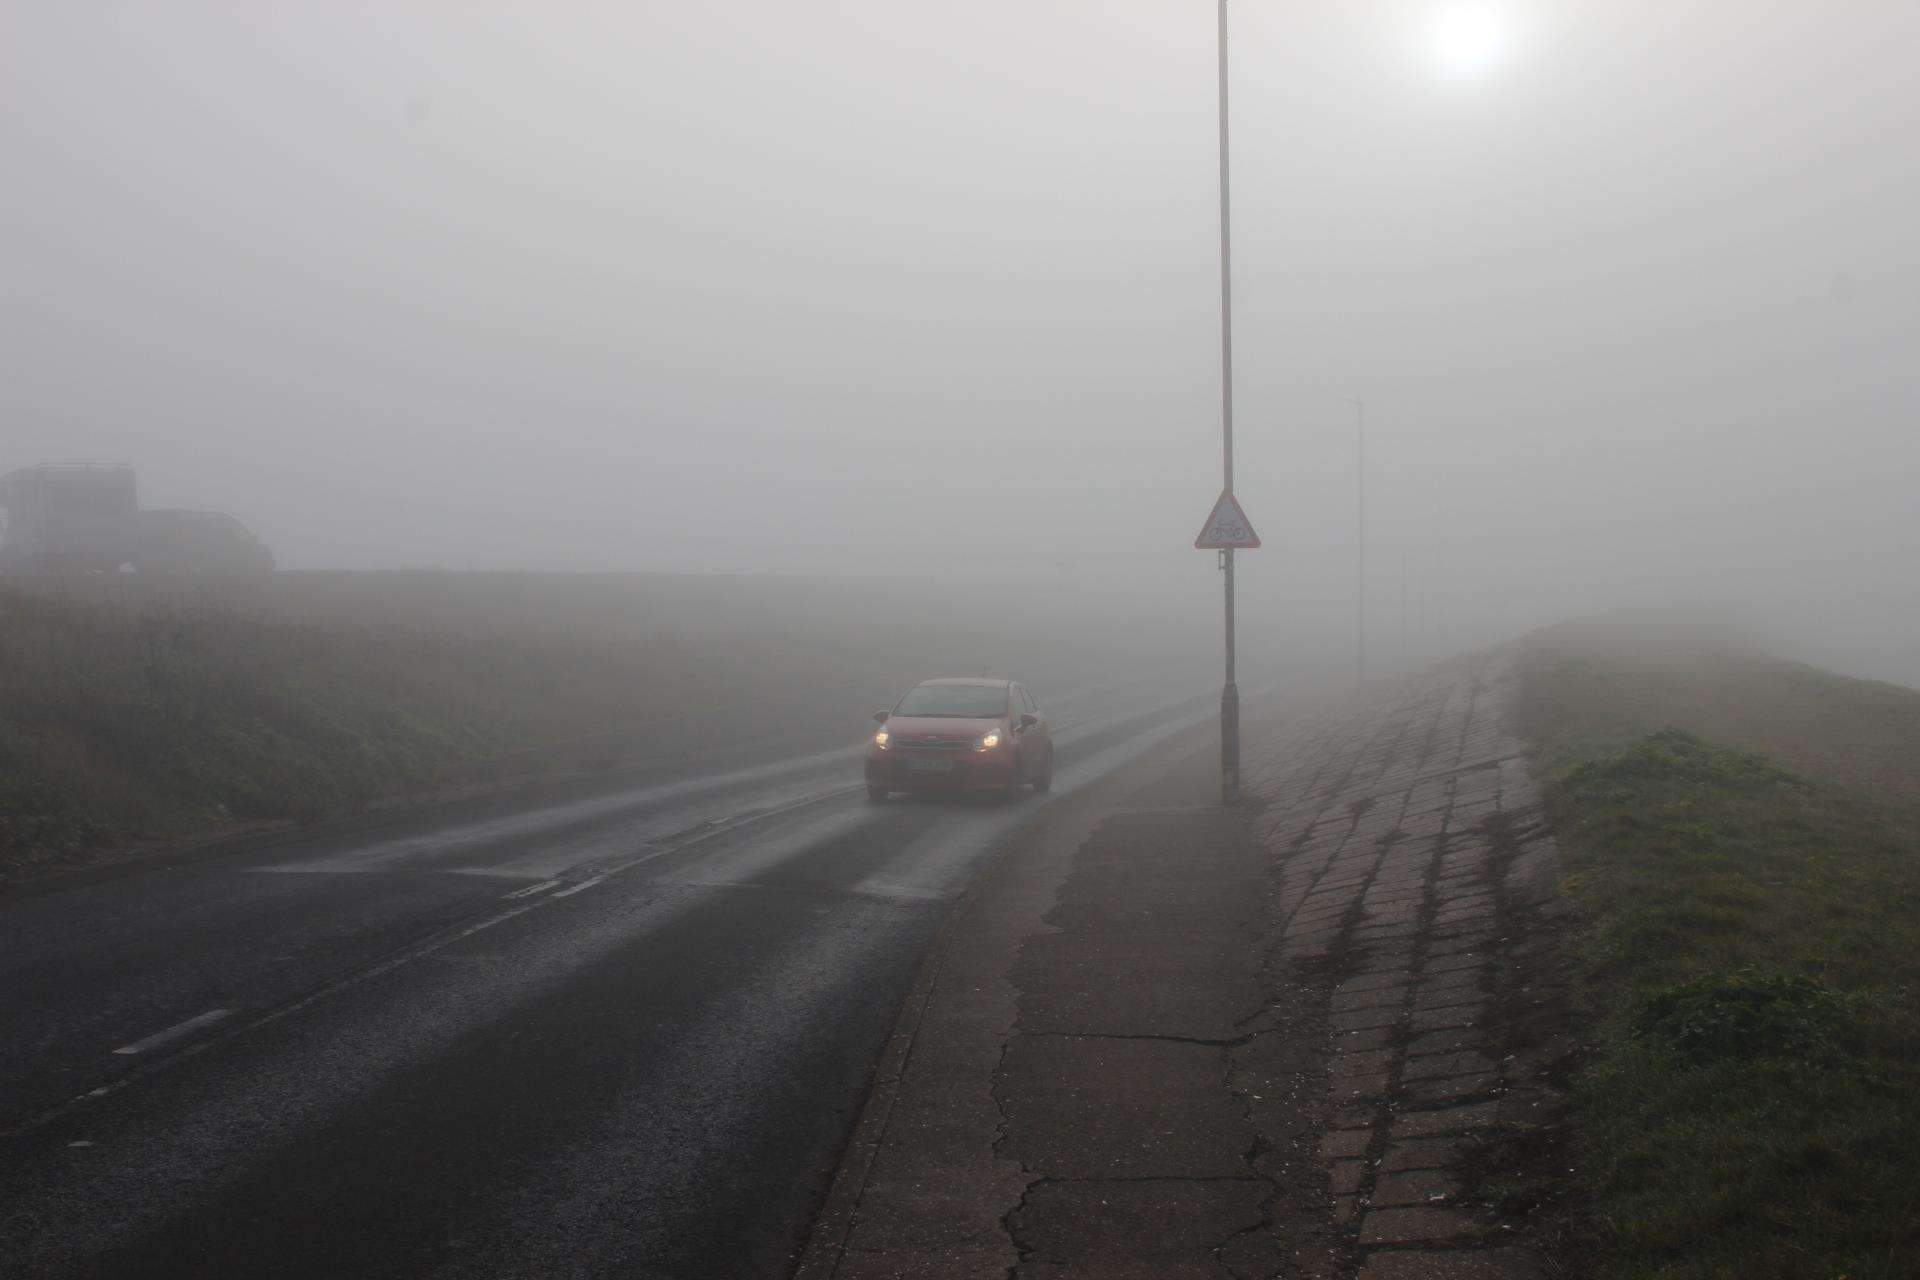 Fog alert: Make sure your lights are on while driving (7392028)